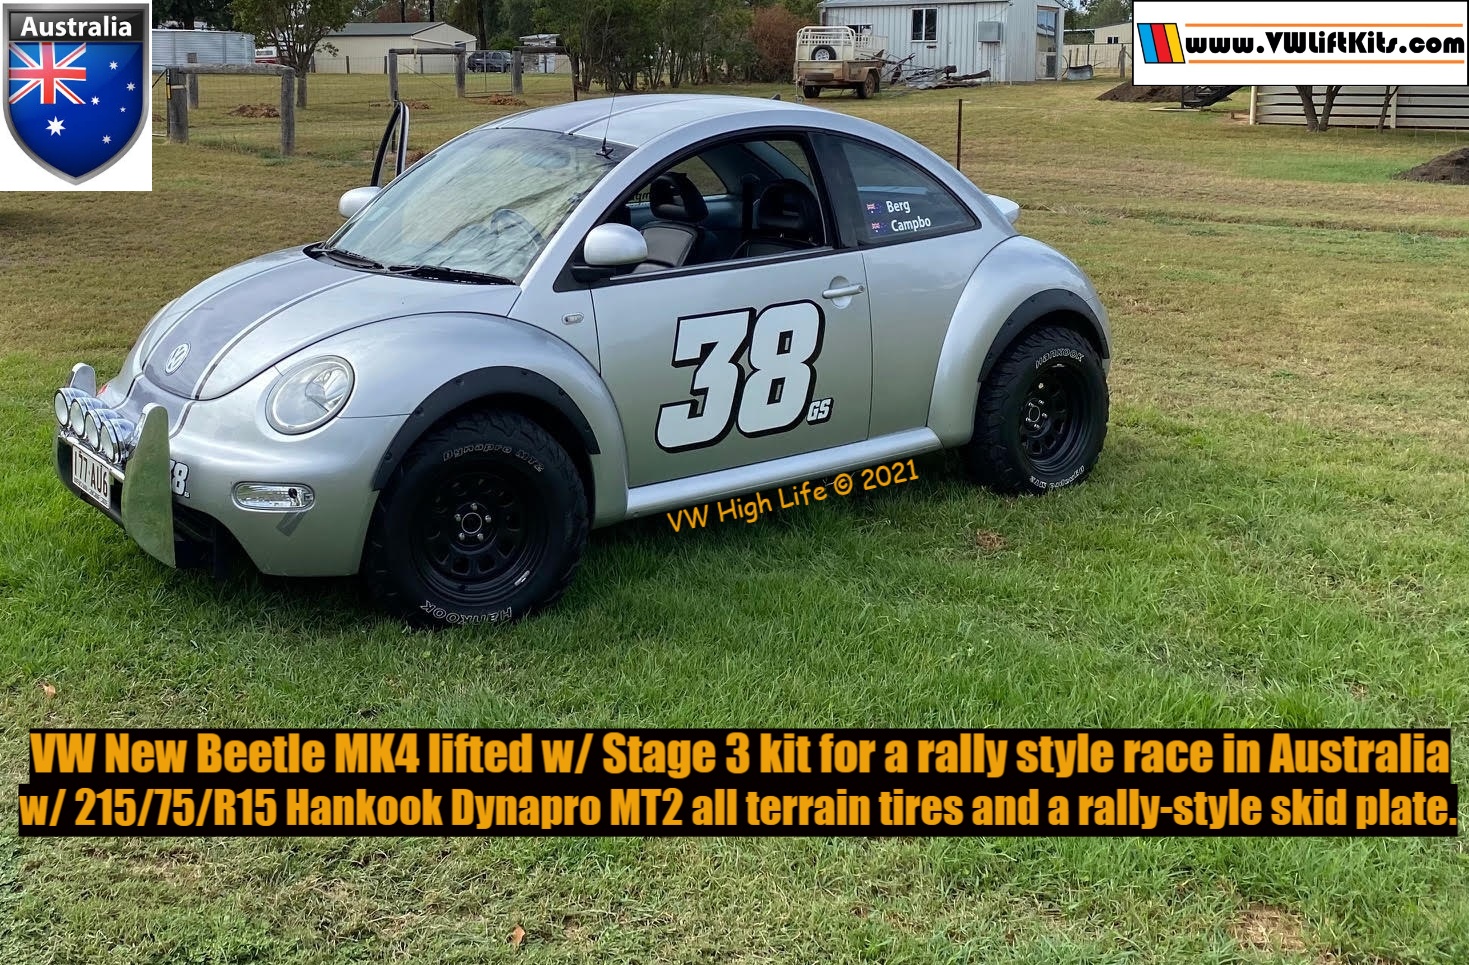 First VW Beetle lifted in Australia with 28-inch off road tires and a rally skid plate. 